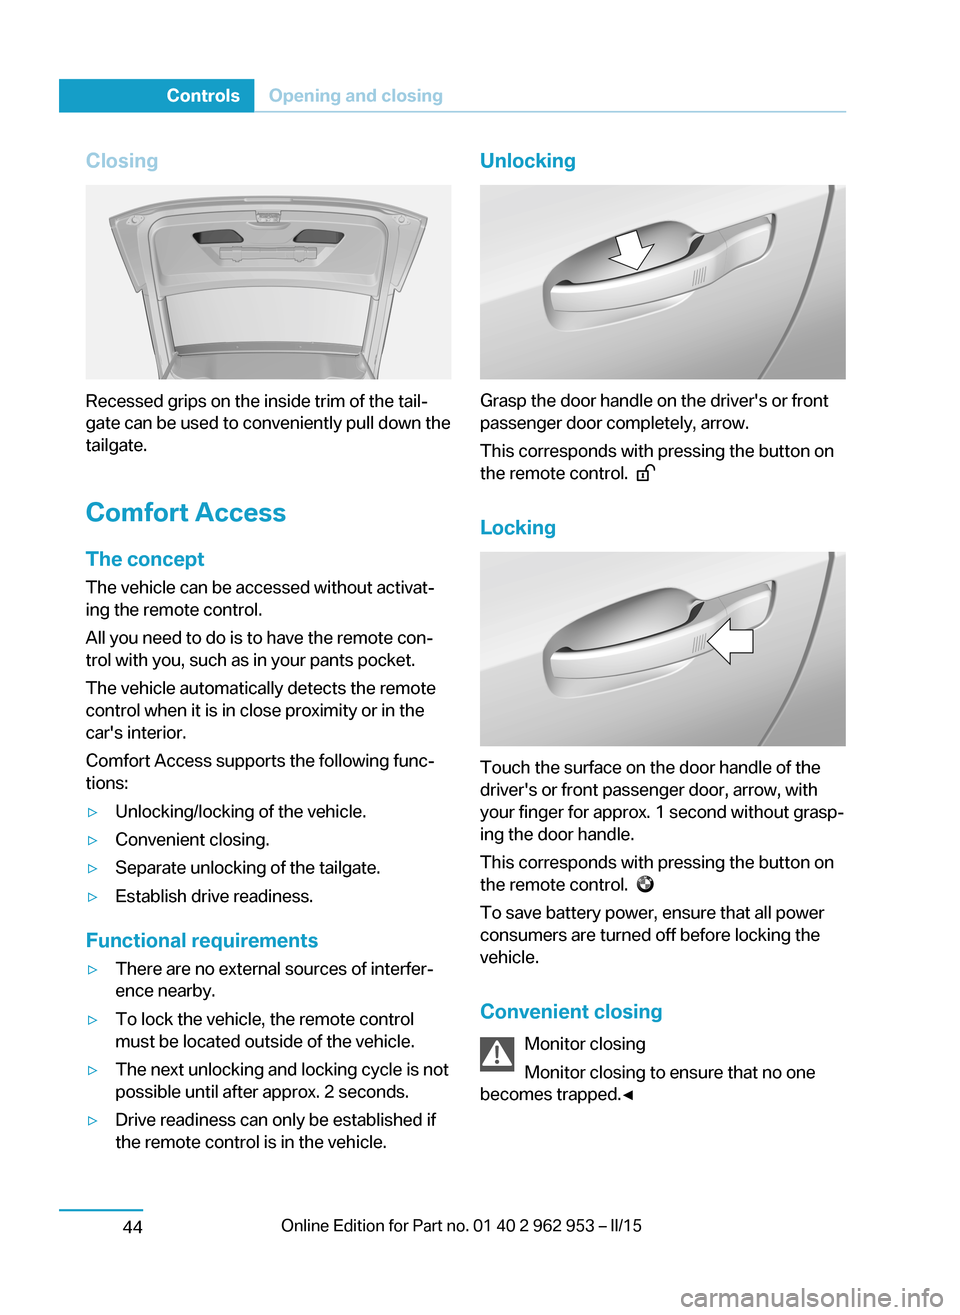 BMW I3 2014 I01 User Guide Closing
Recessed grips on the inside trim of the tail‐
gate can be used to conveniently pull down the
tailgate.
Comfort Access
The concept The vehicle can be accessed without activat‐
ing the remo